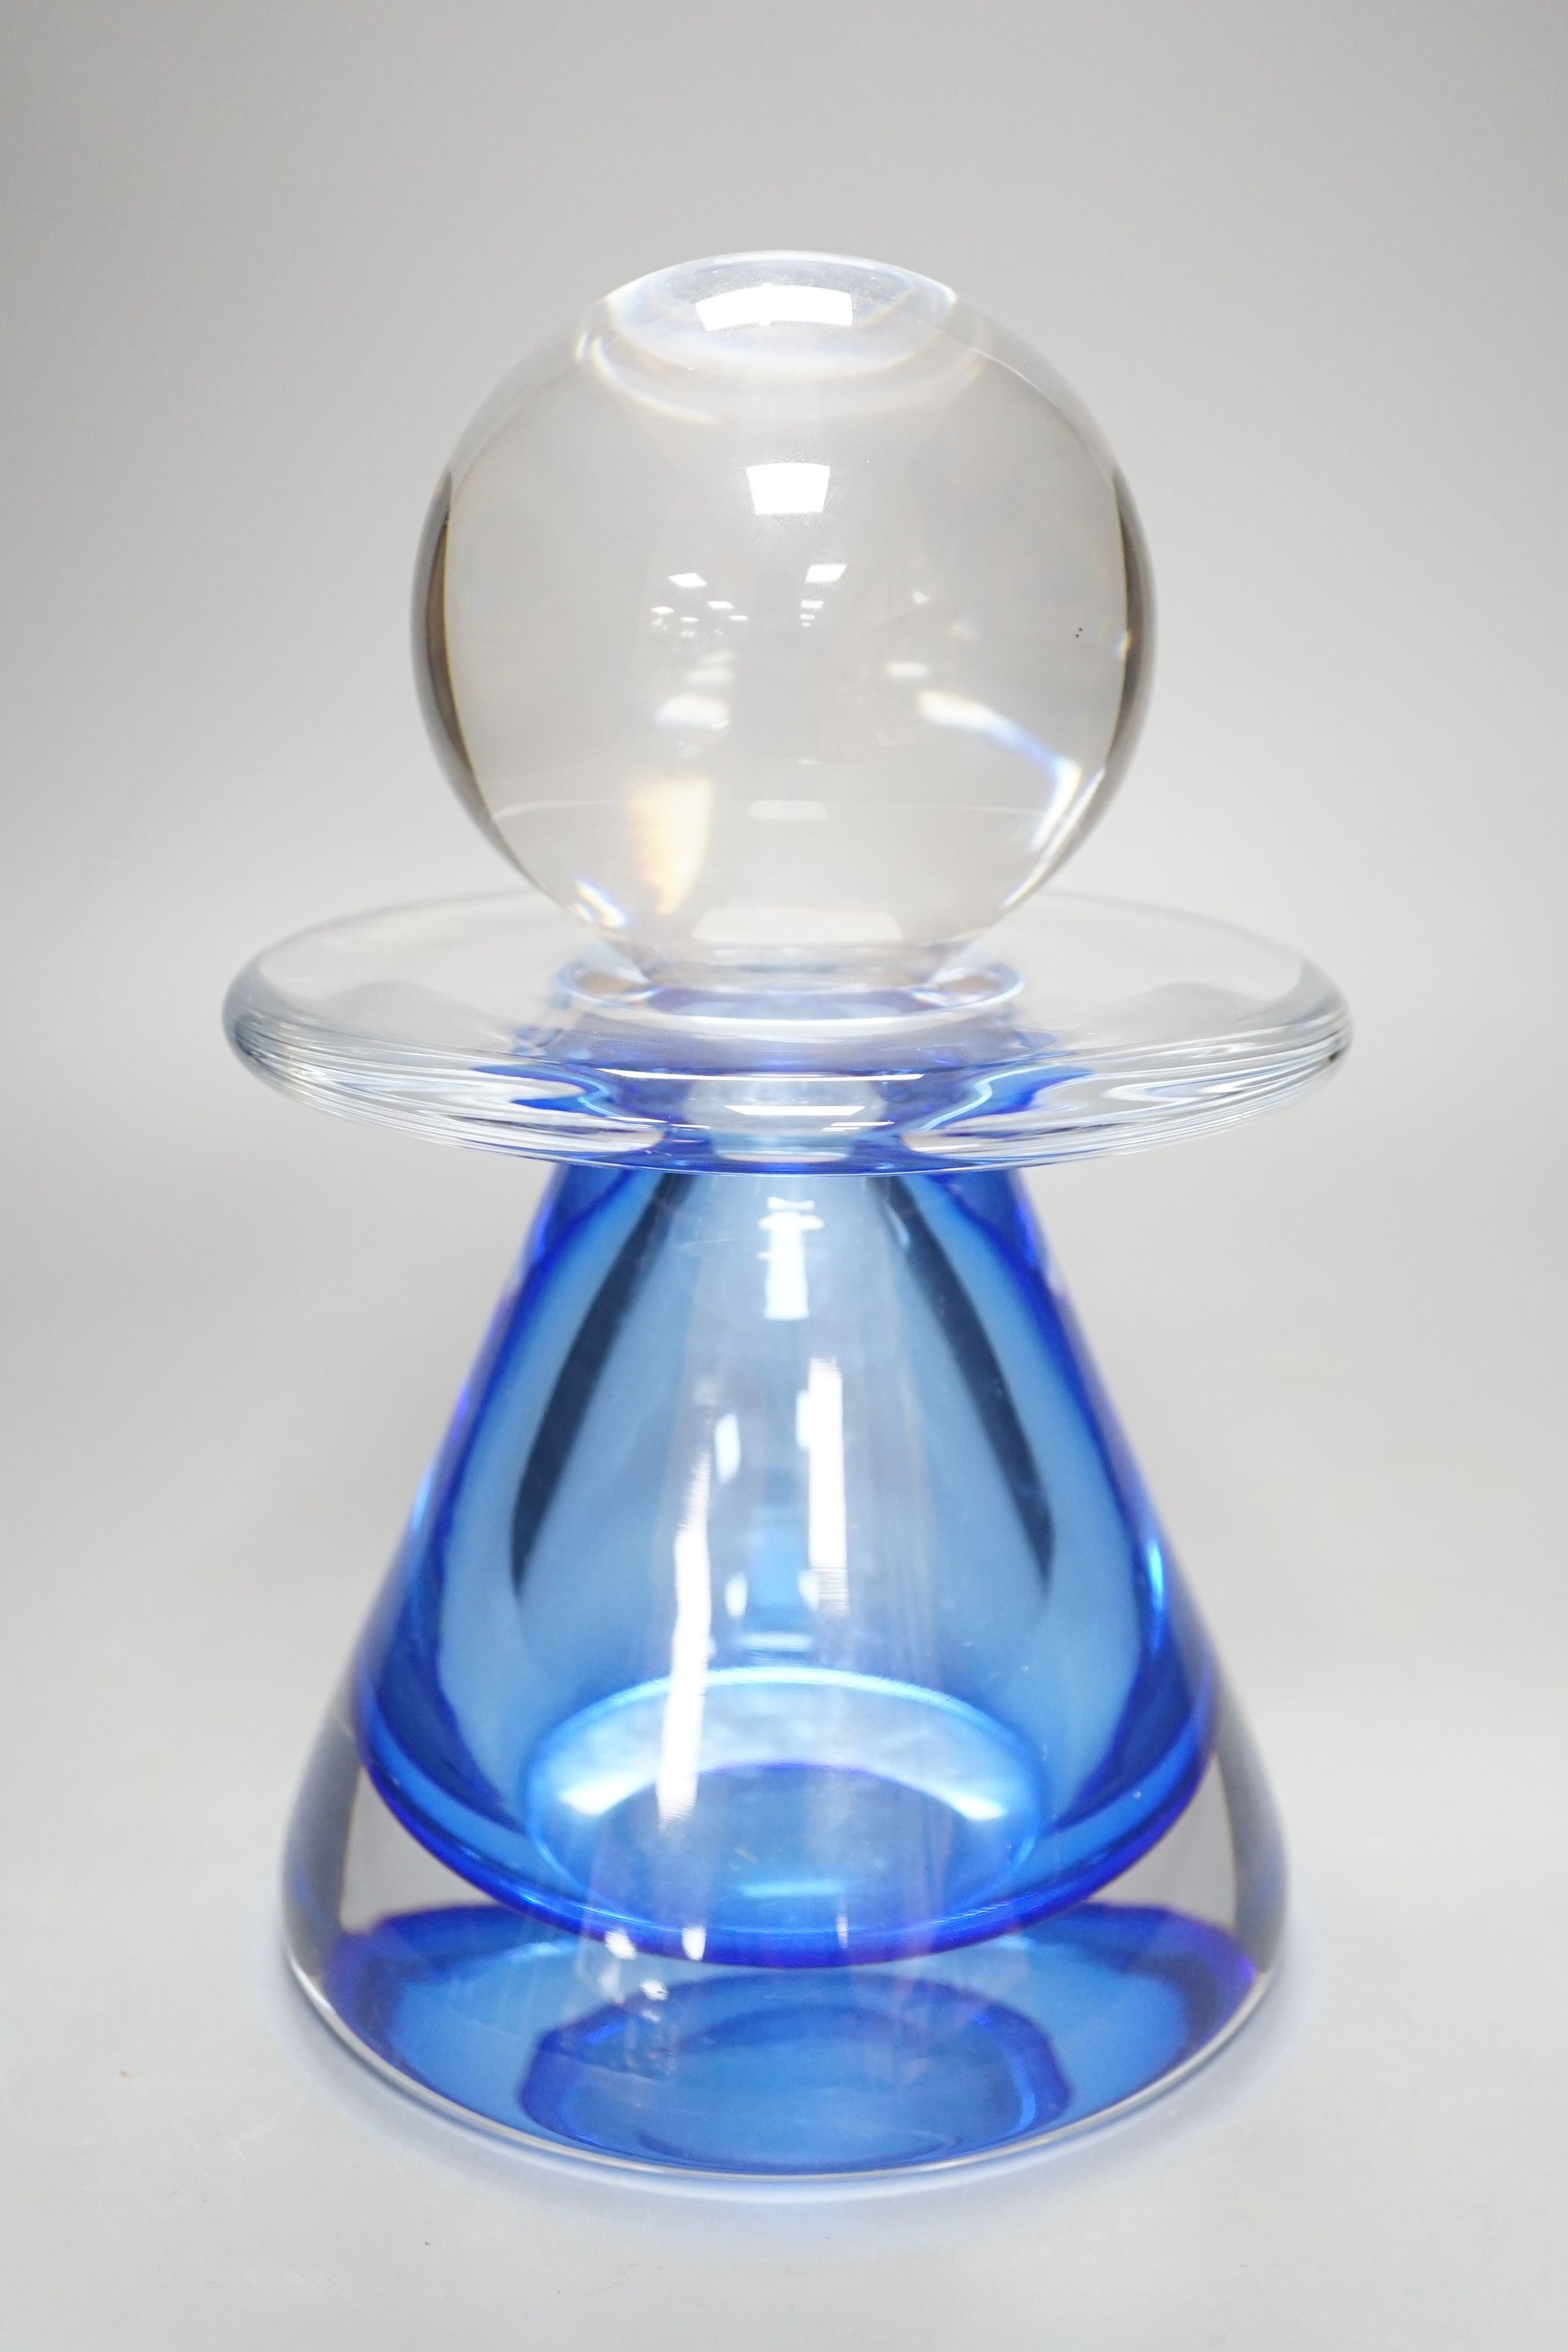 A Val St Lambert limited edition privatisation decanter, 7/500. Height 25cm